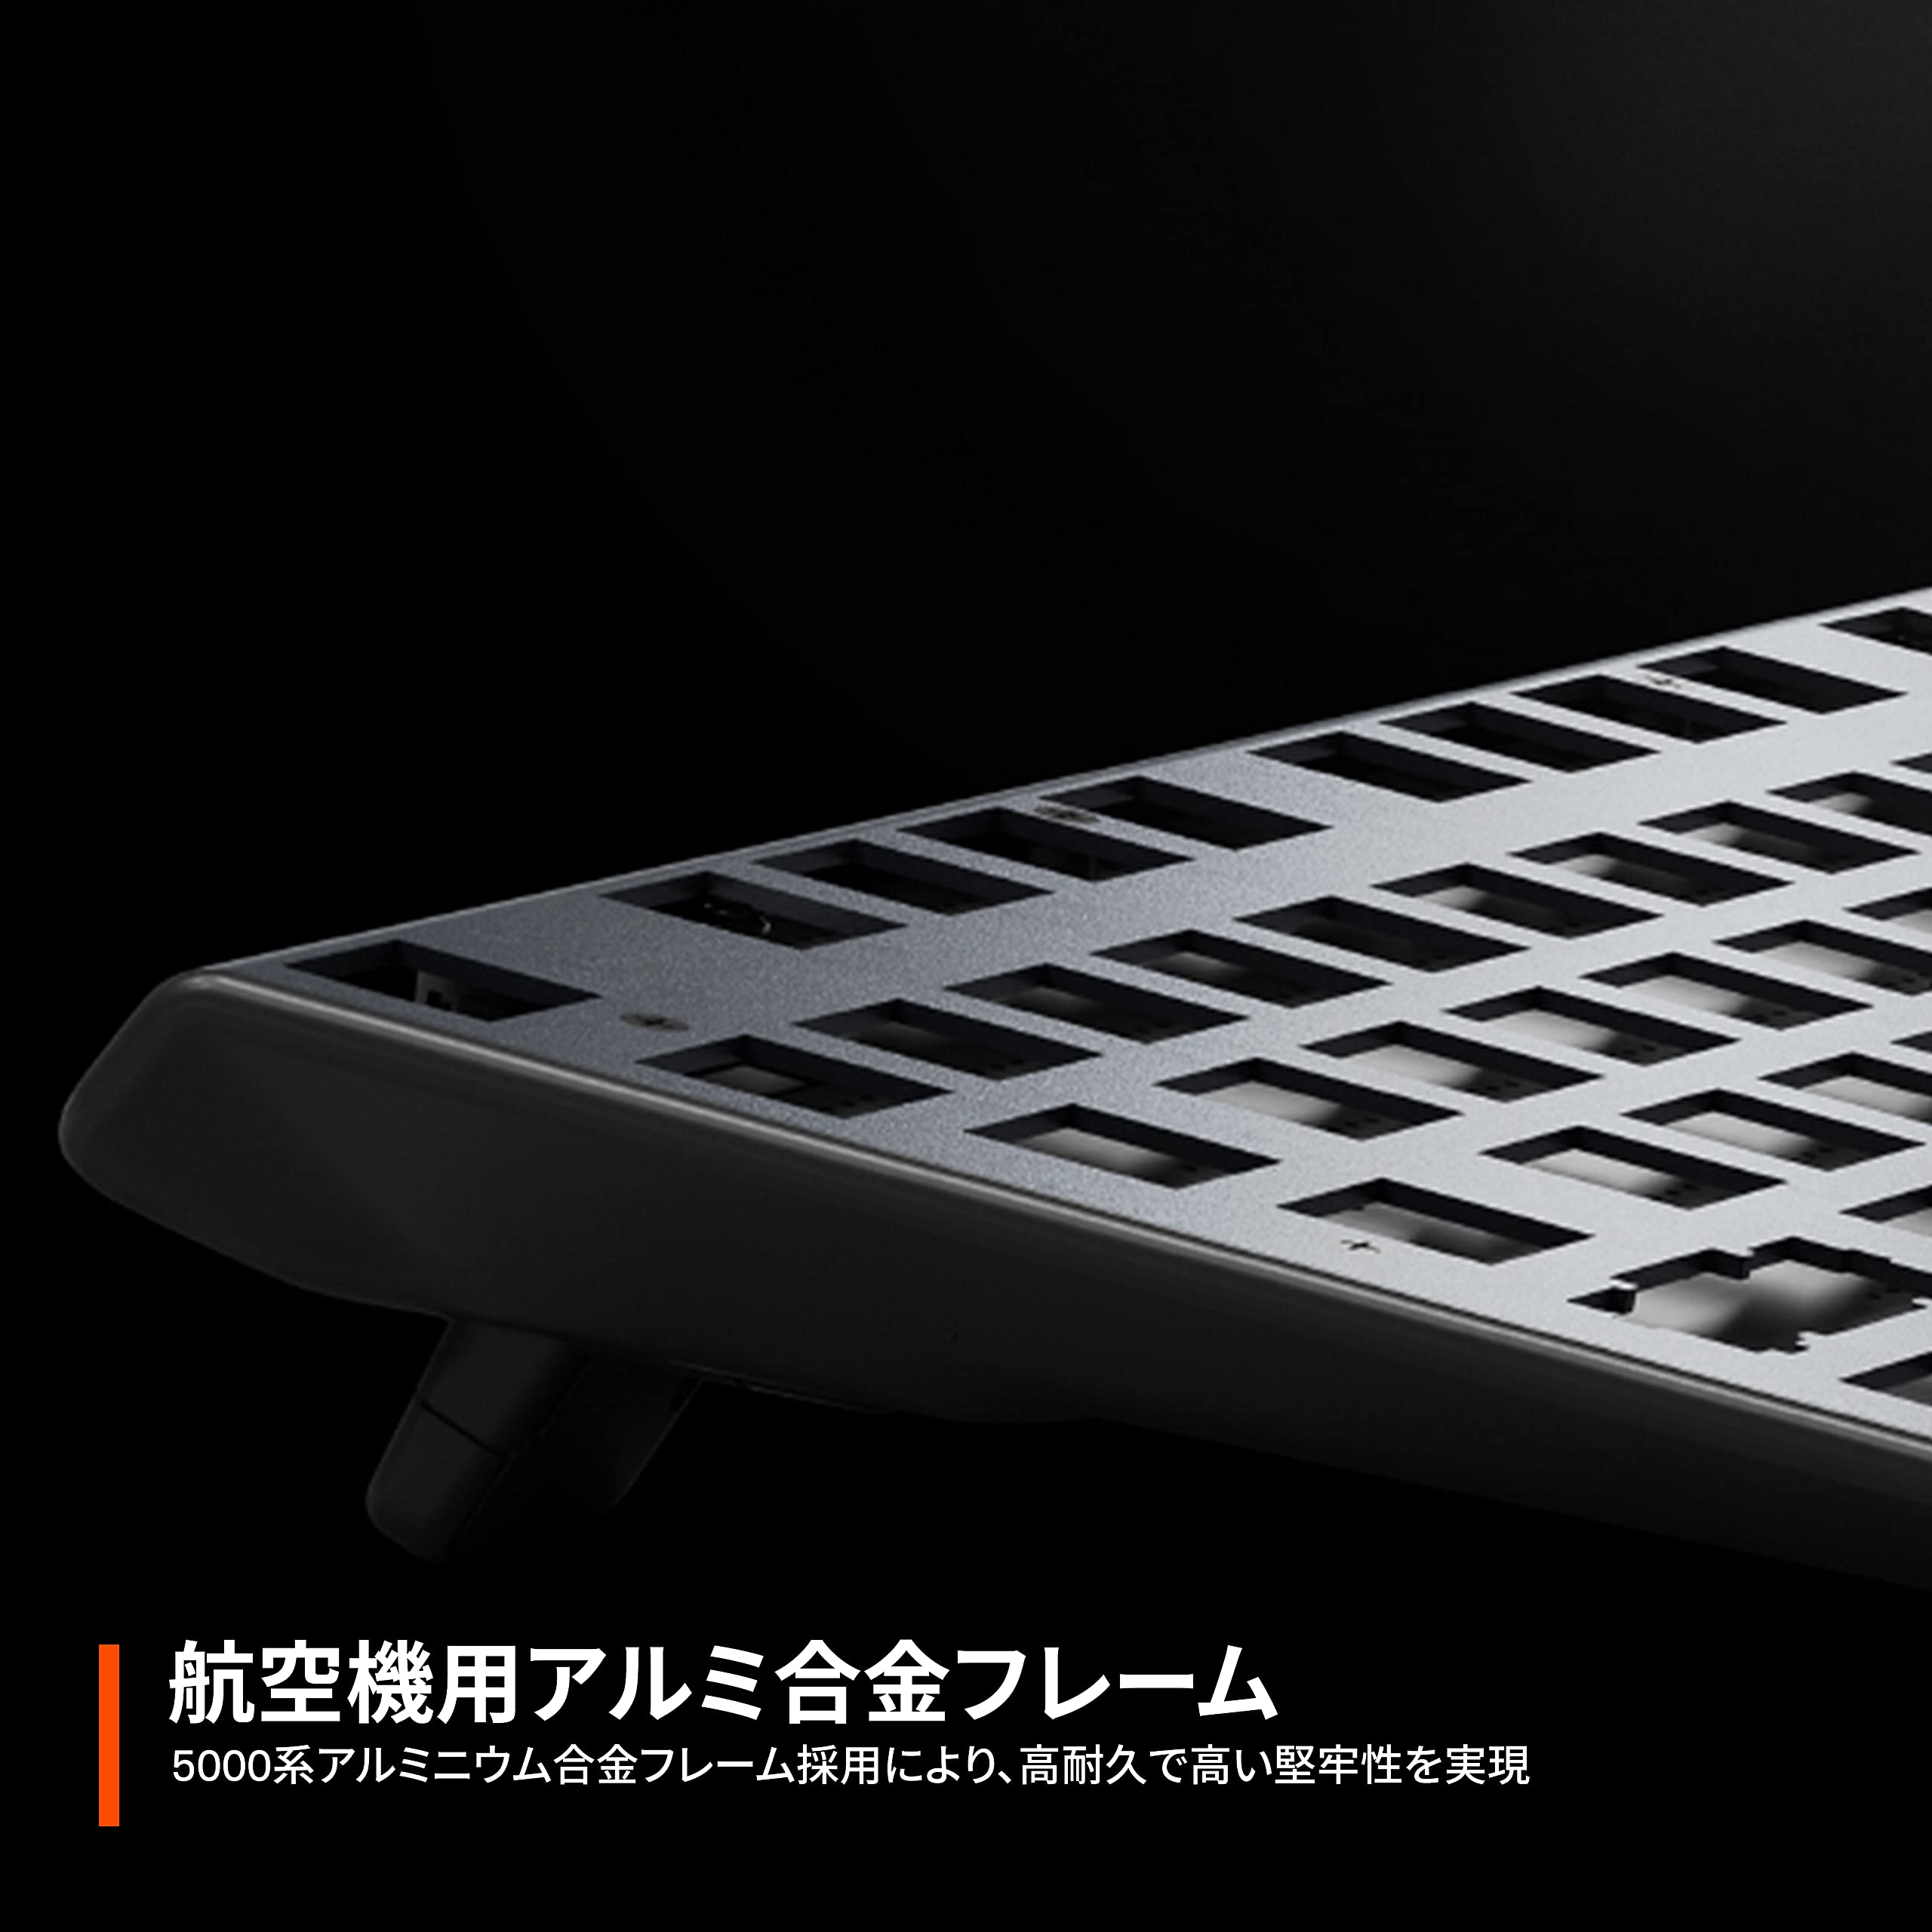 SteelSeries 64649 Gaming Keyboard, Numeric Keypadless, Red Axis, Wired Japanese Arrangement, Equipped with OLED Display, Apex 7 TKL Red Switch